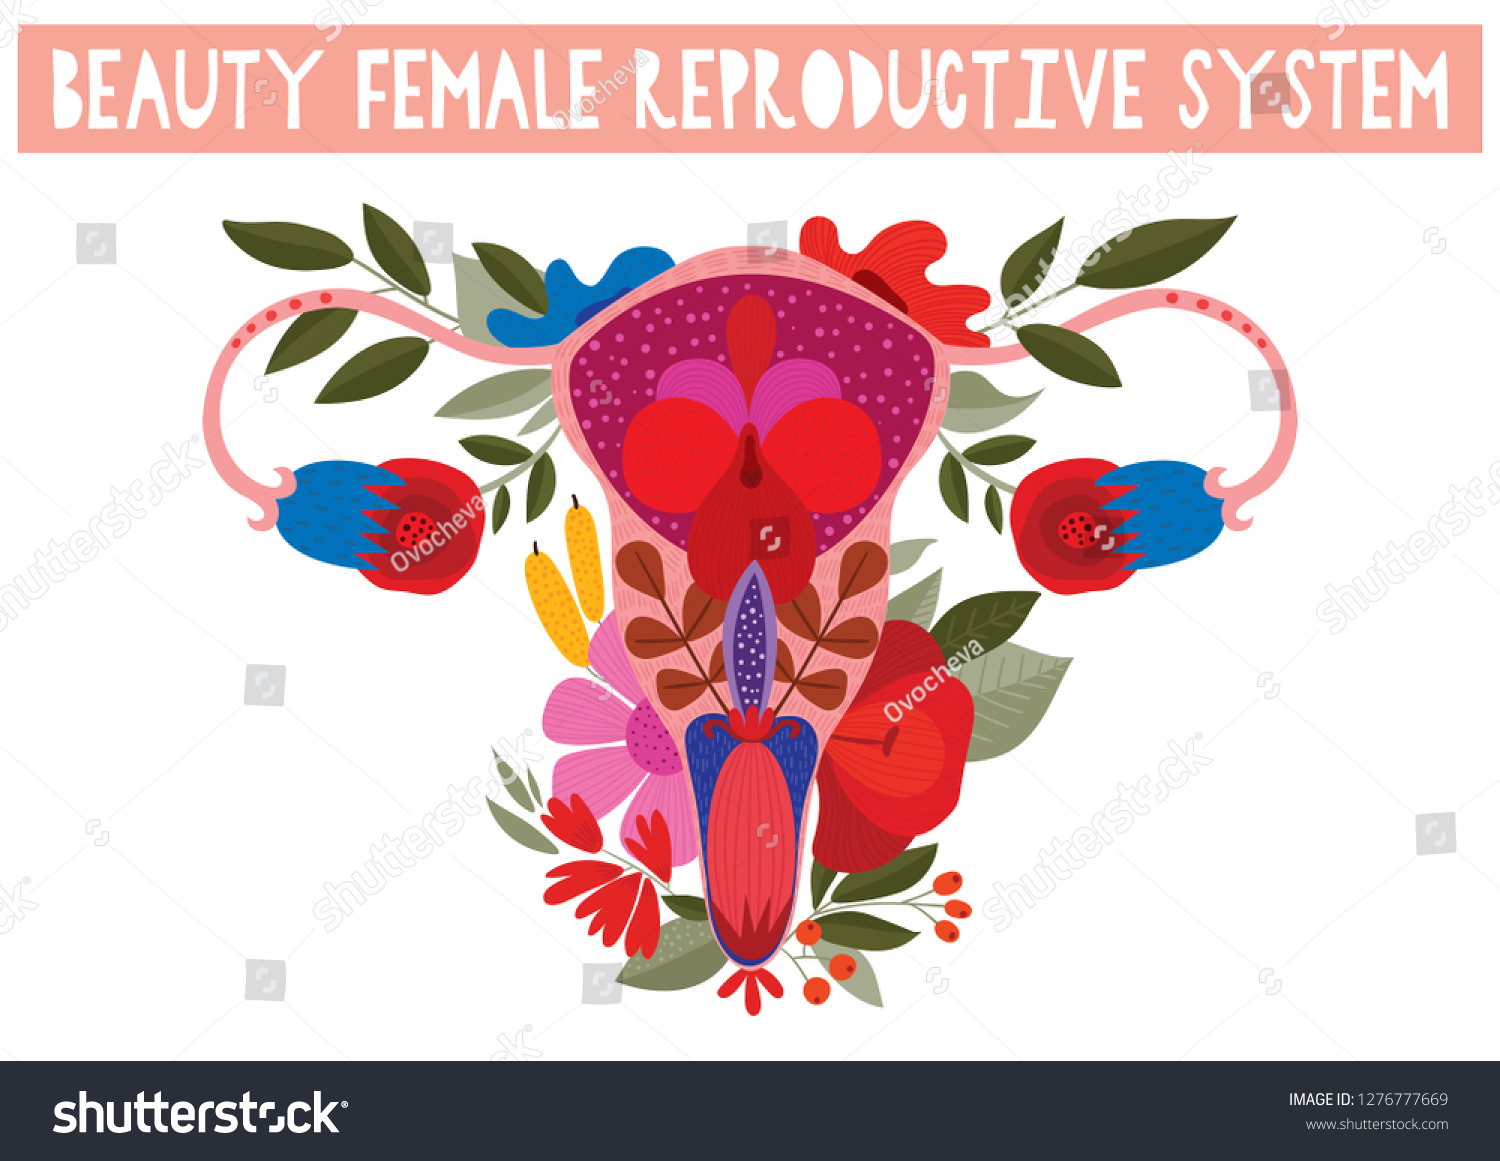 Beauty Female Reproductive System Flowers Hand Stock Vector Royalty Free 1276777669 Shutterstock 5430